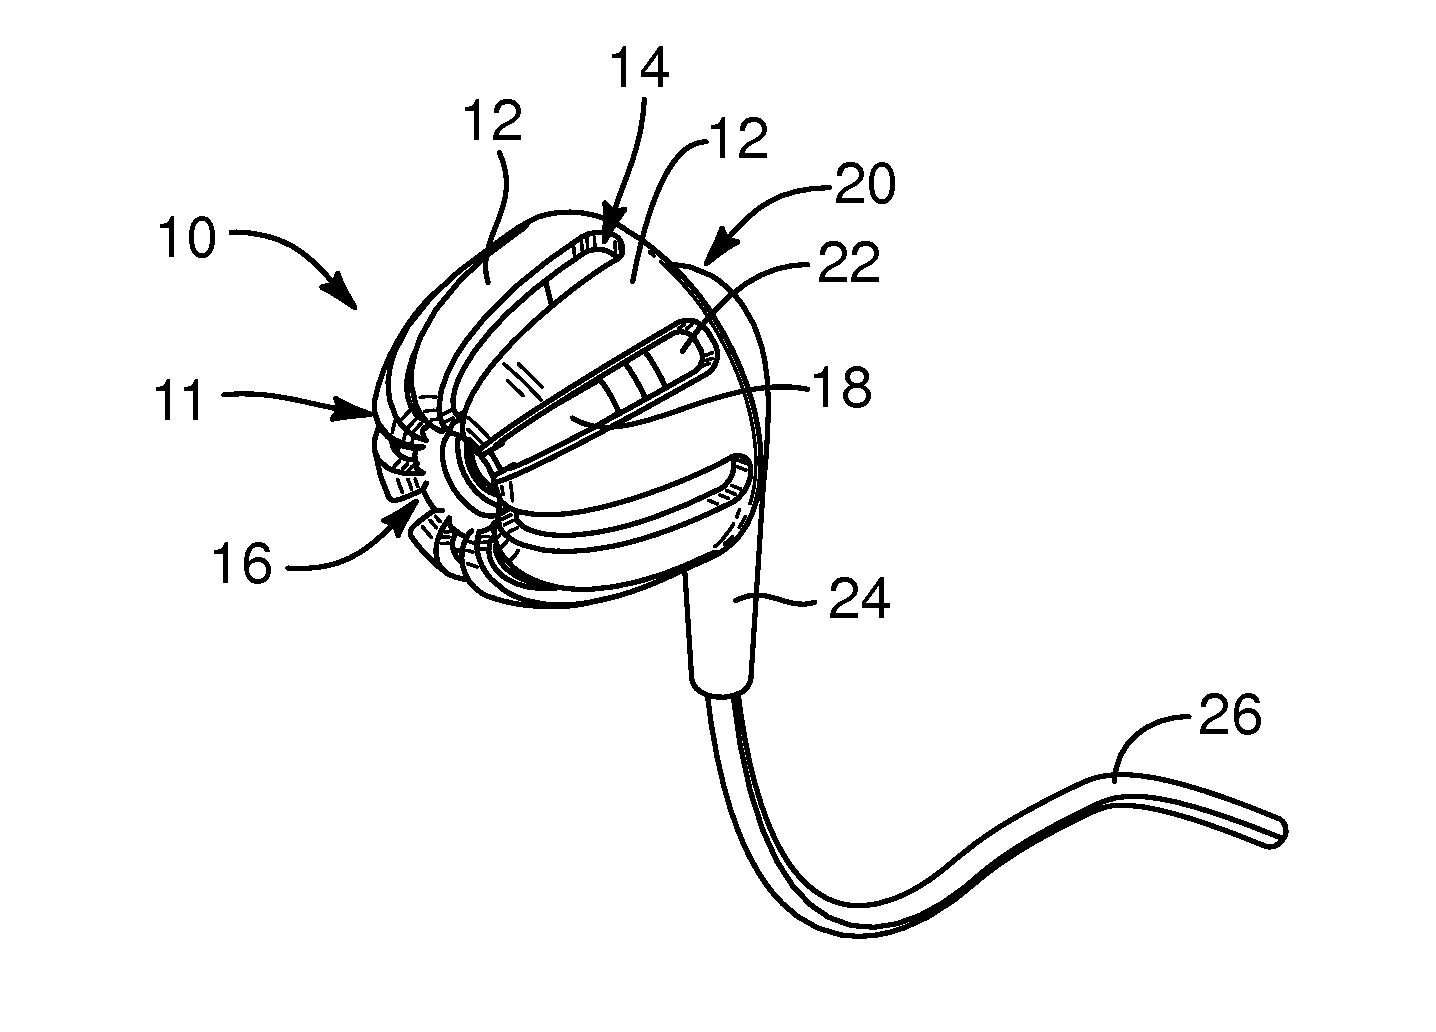 Audio-bypass, safety earbud apparatus and method